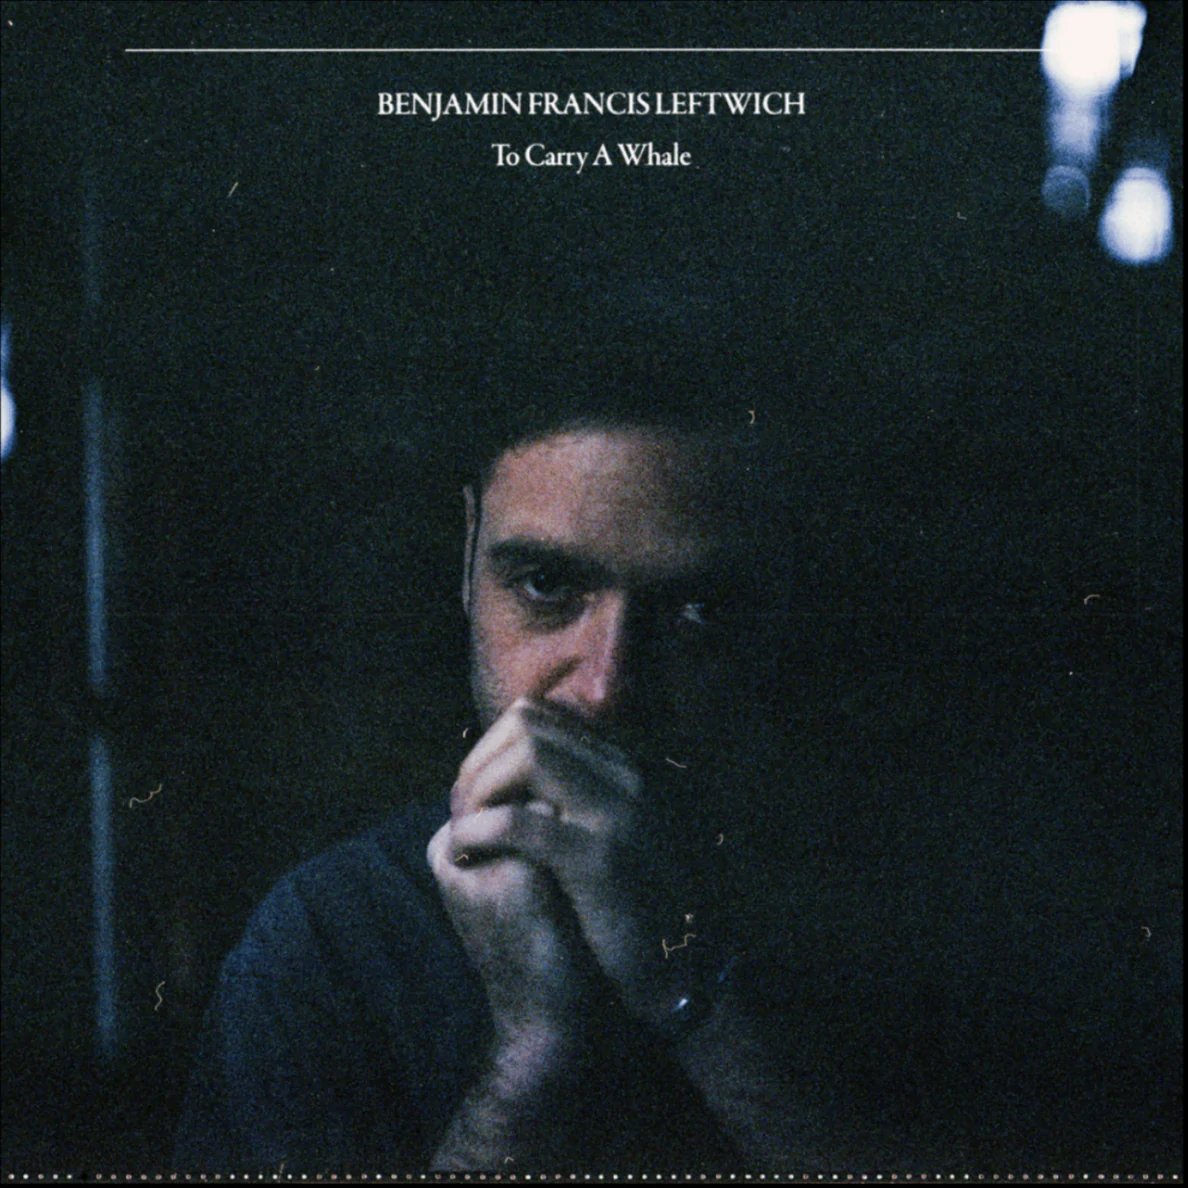 ALBUM REVIEW: Benjamin Francis Leftwich – To Carry A Whale